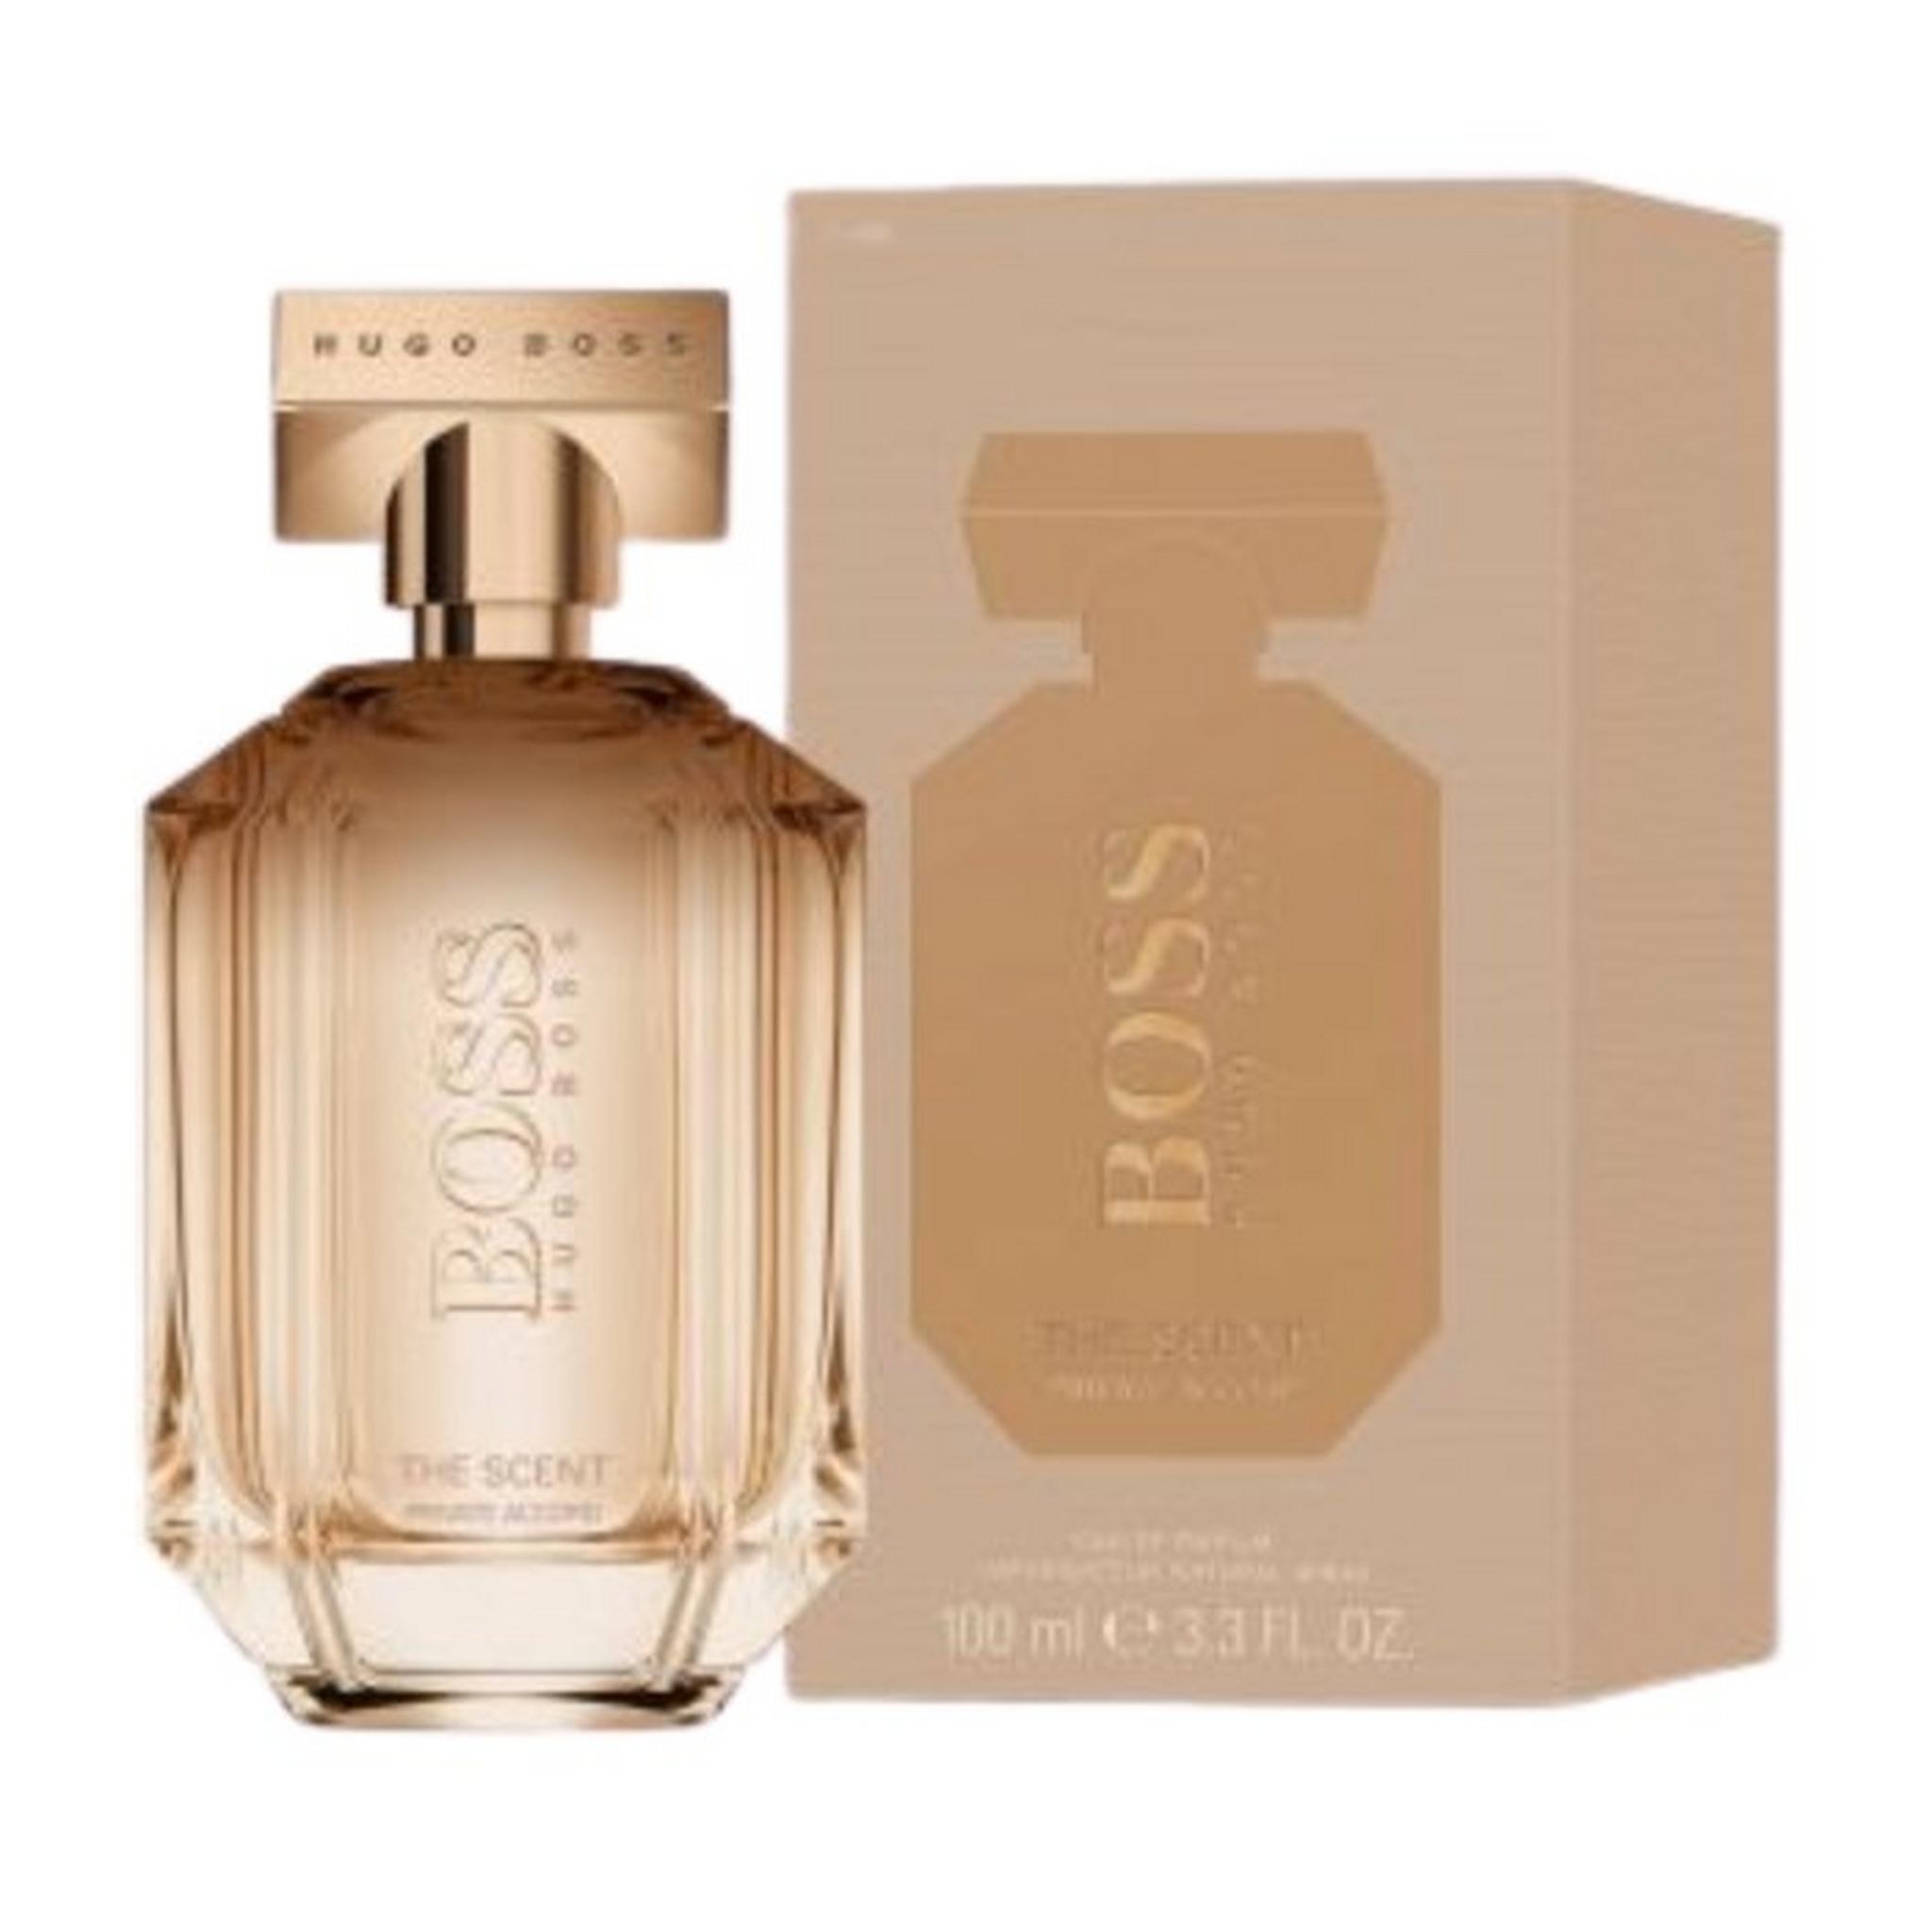 The Scent Private Accord by Hugo Boss for Women Eau de Parfum 100ML.